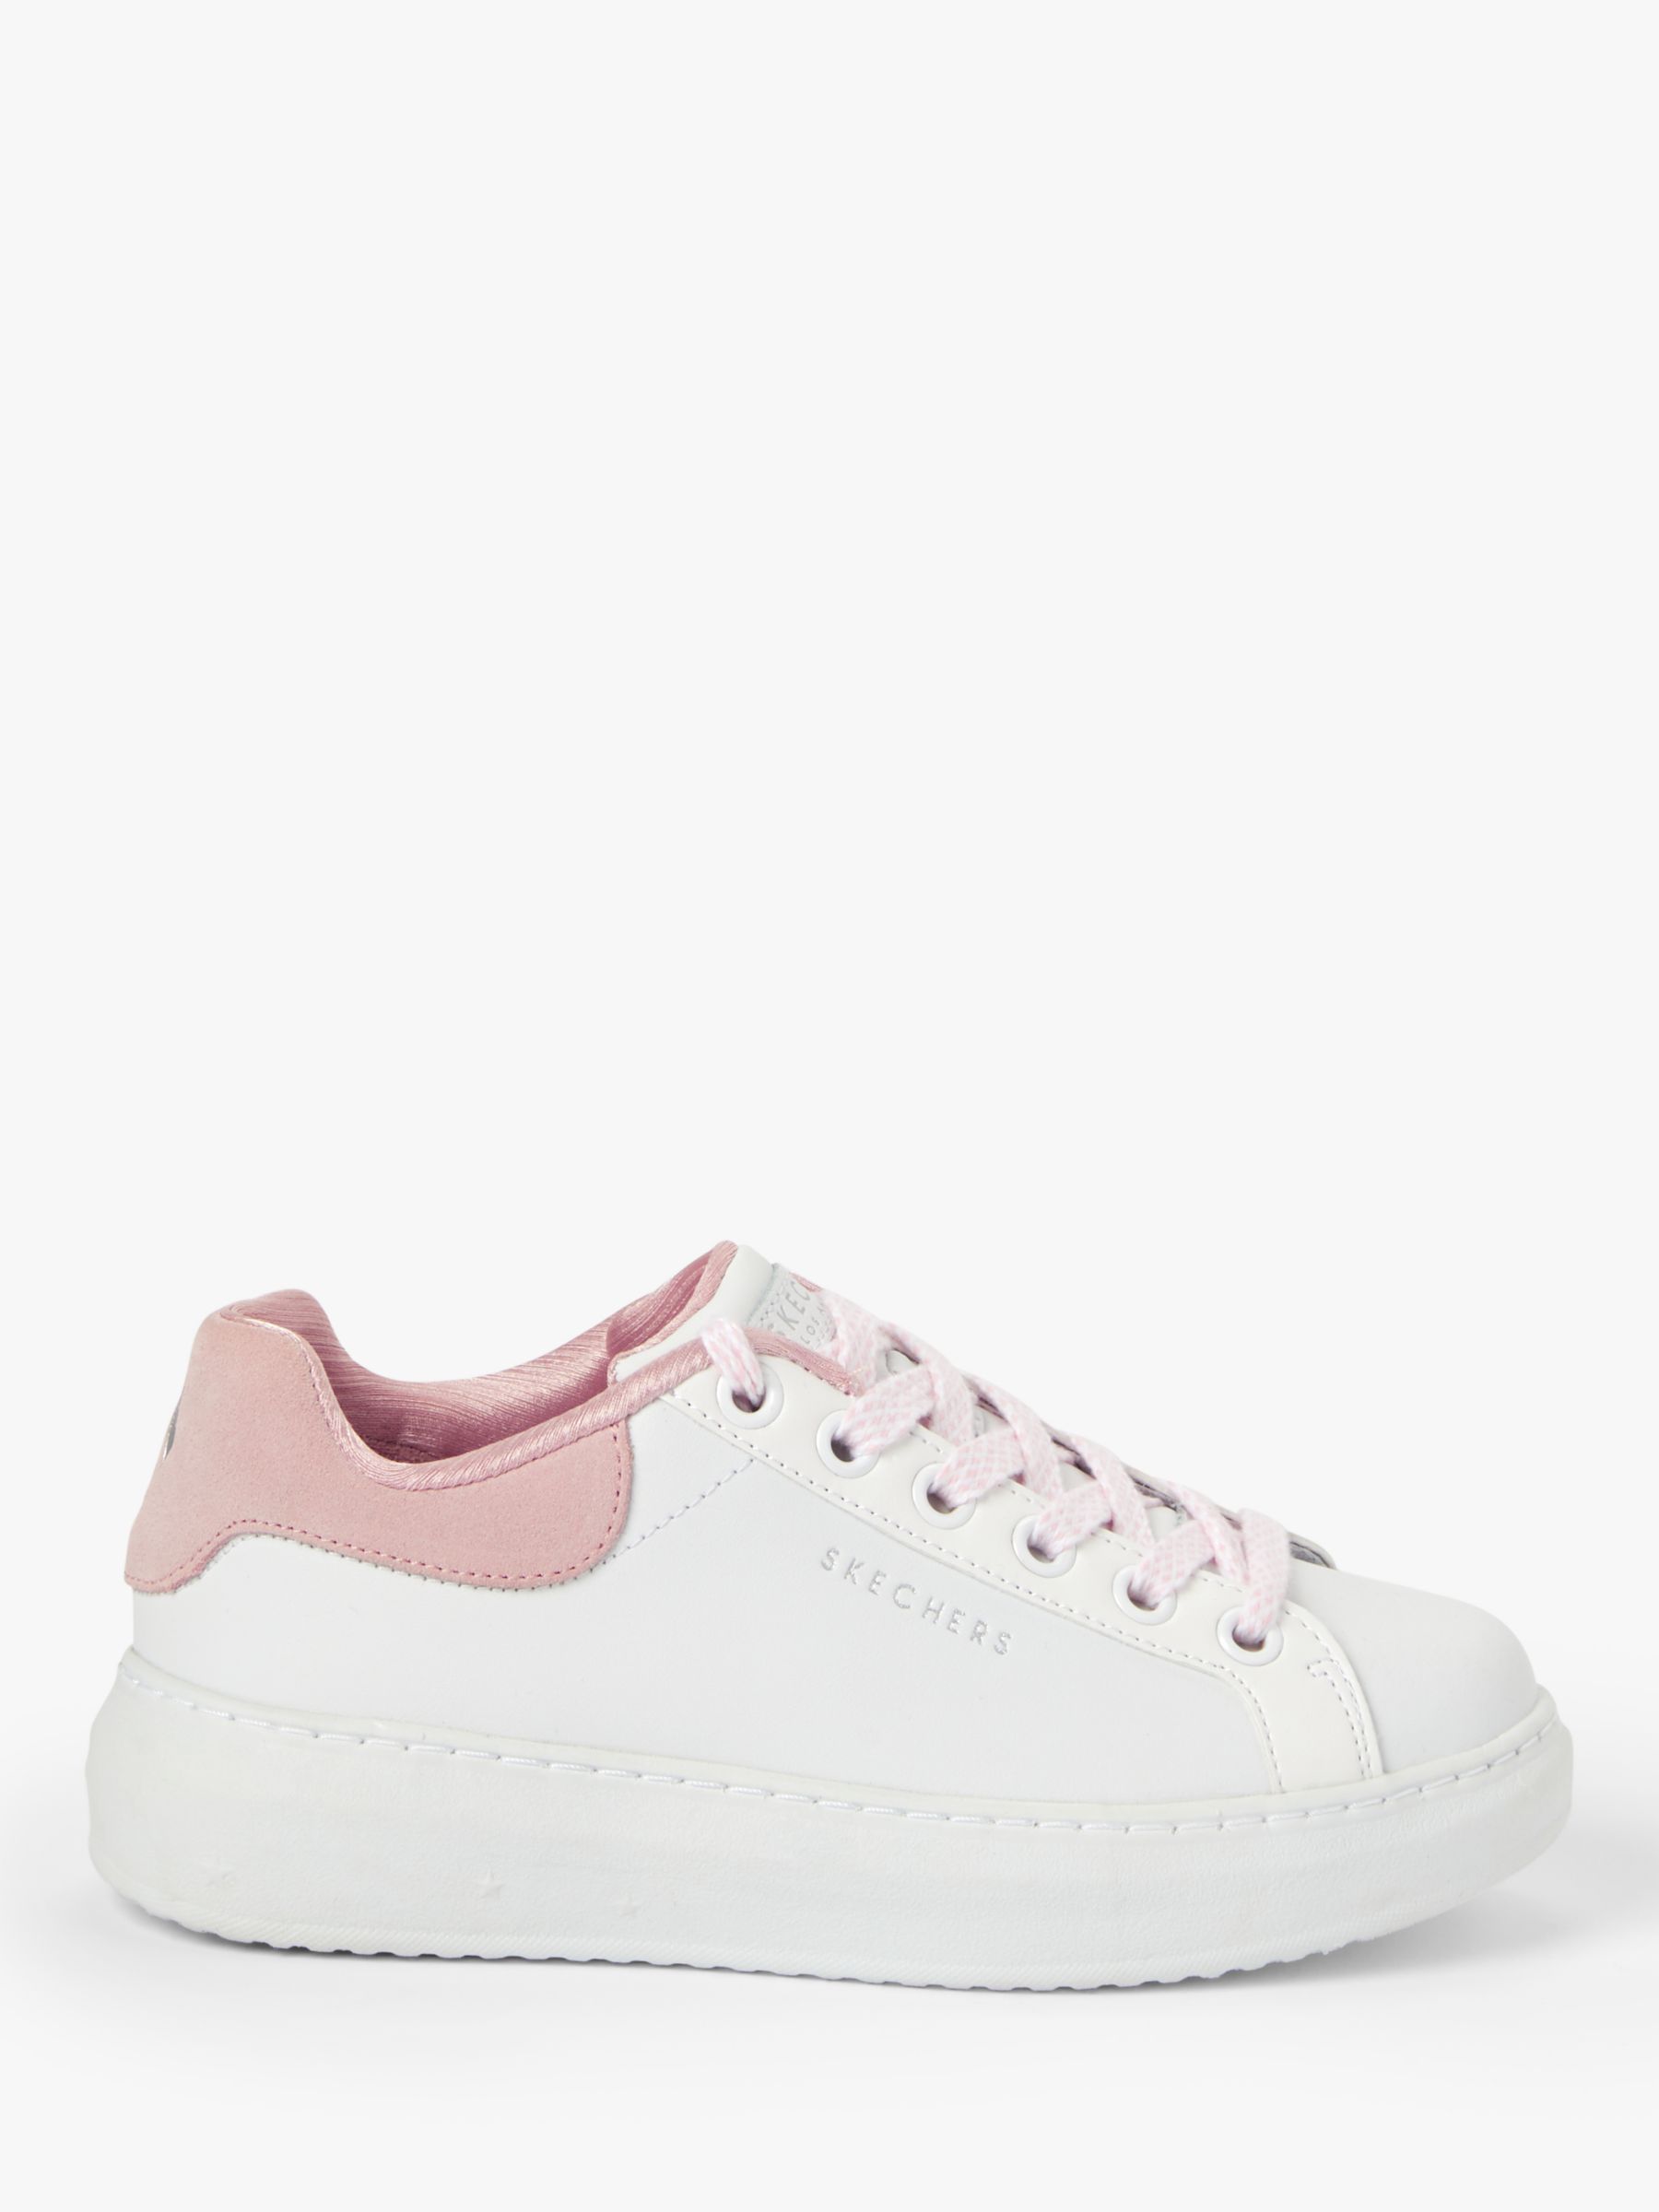 Skechers High Street Lace Up Trainers, White/Pink Leather